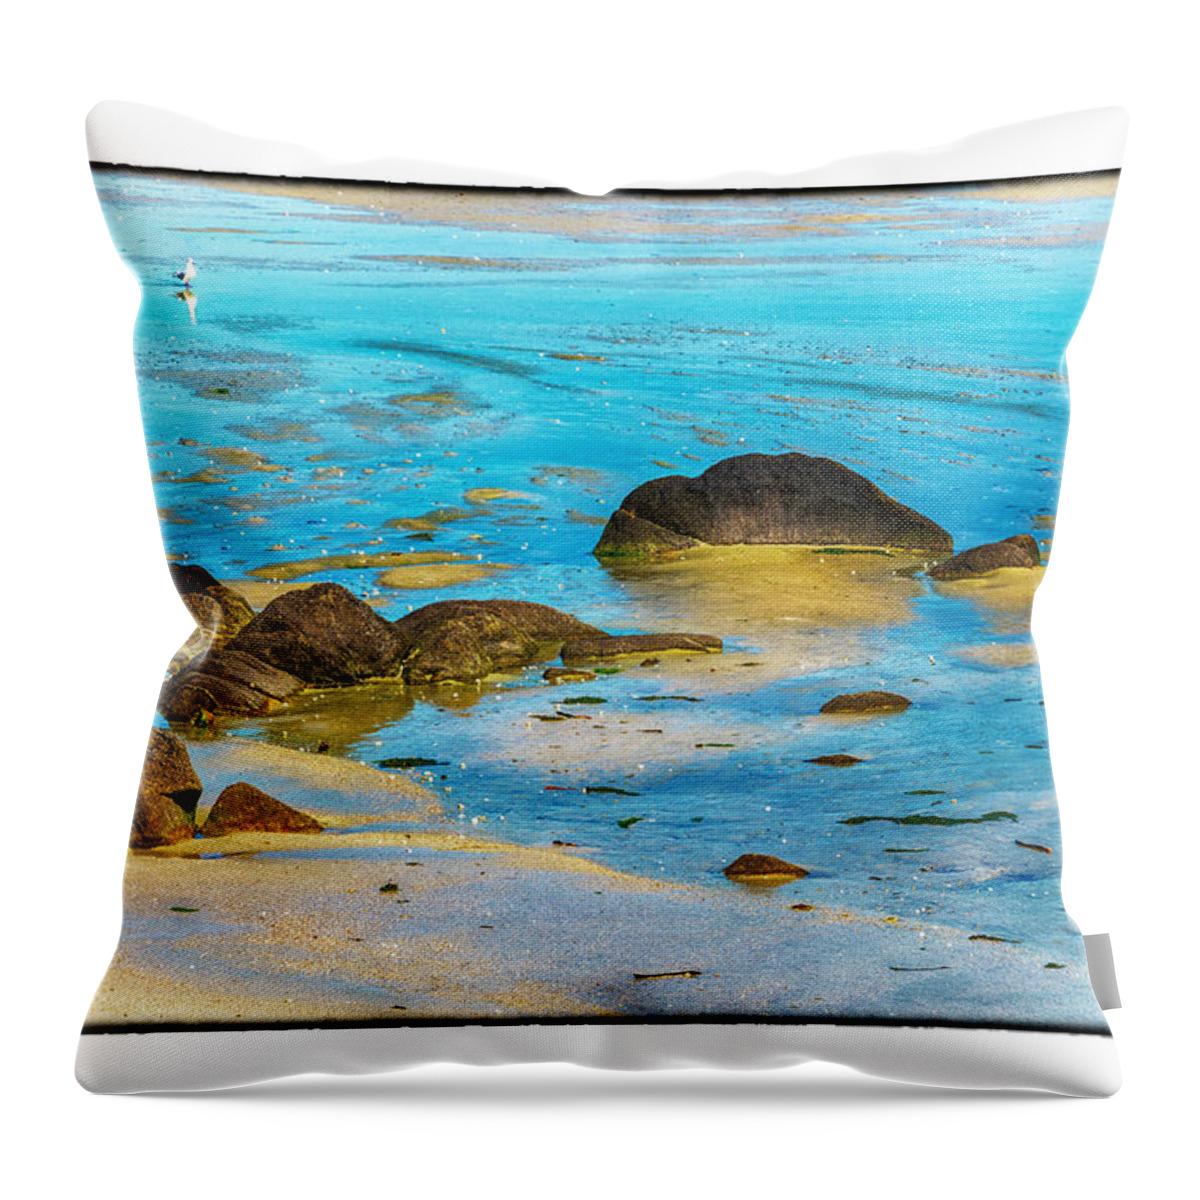 Rocks Throw Pillow featuring the photograph Rocks by R Thomas Berner